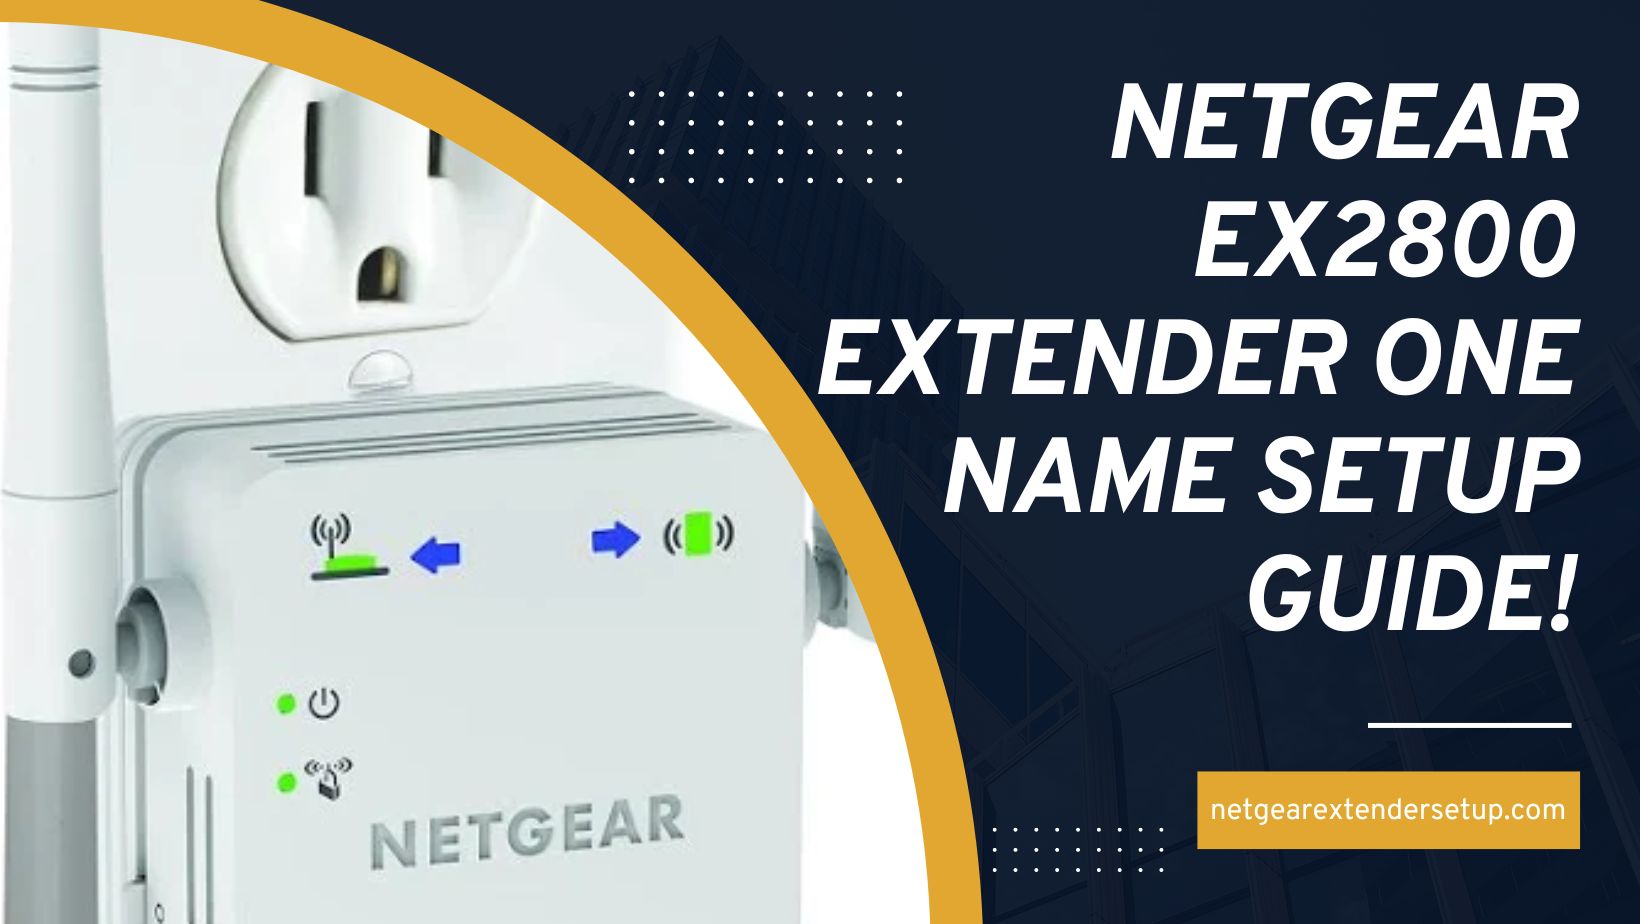 You are currently viewing Netgear EX2800 Extender One Name Setup Guide!